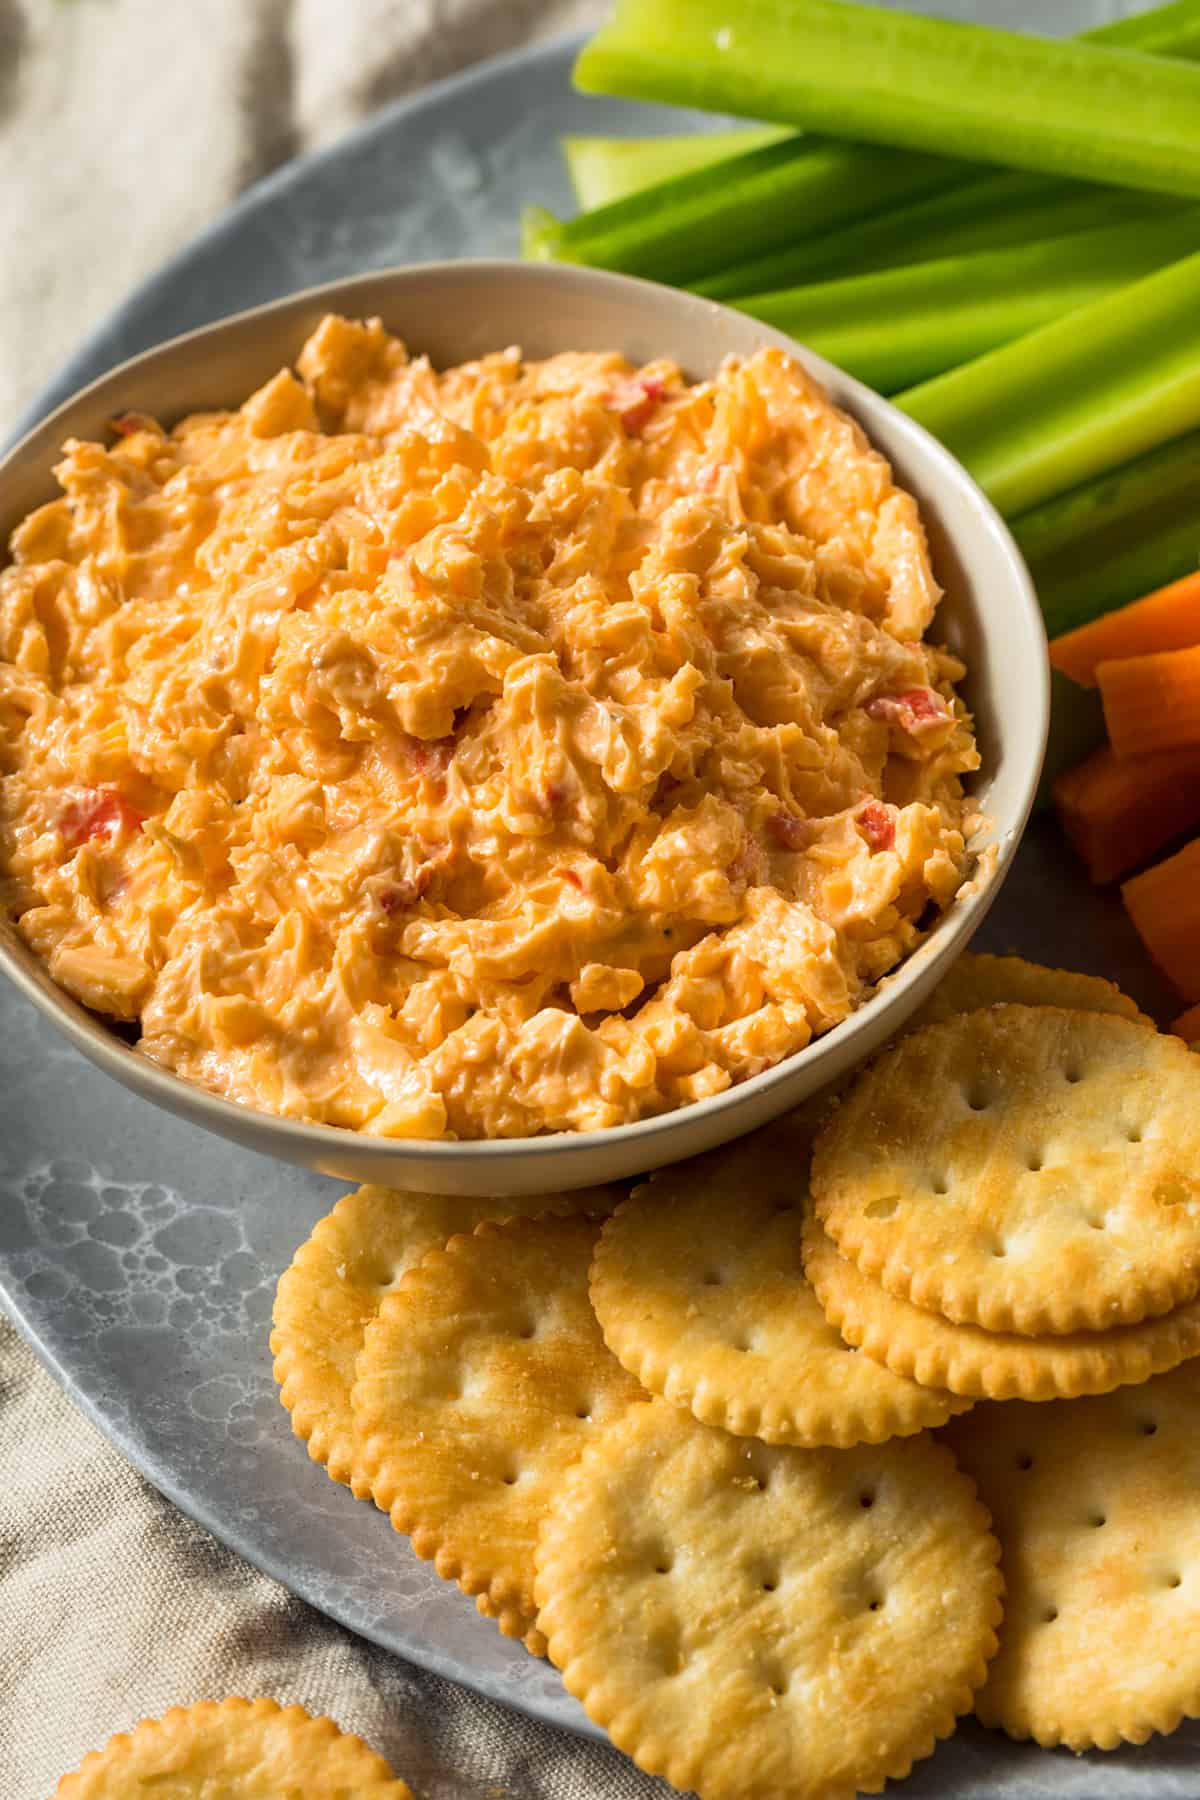 pimento cheese recipe traditional southern dip spread pimentos cream cheese mayonnaise cheddar